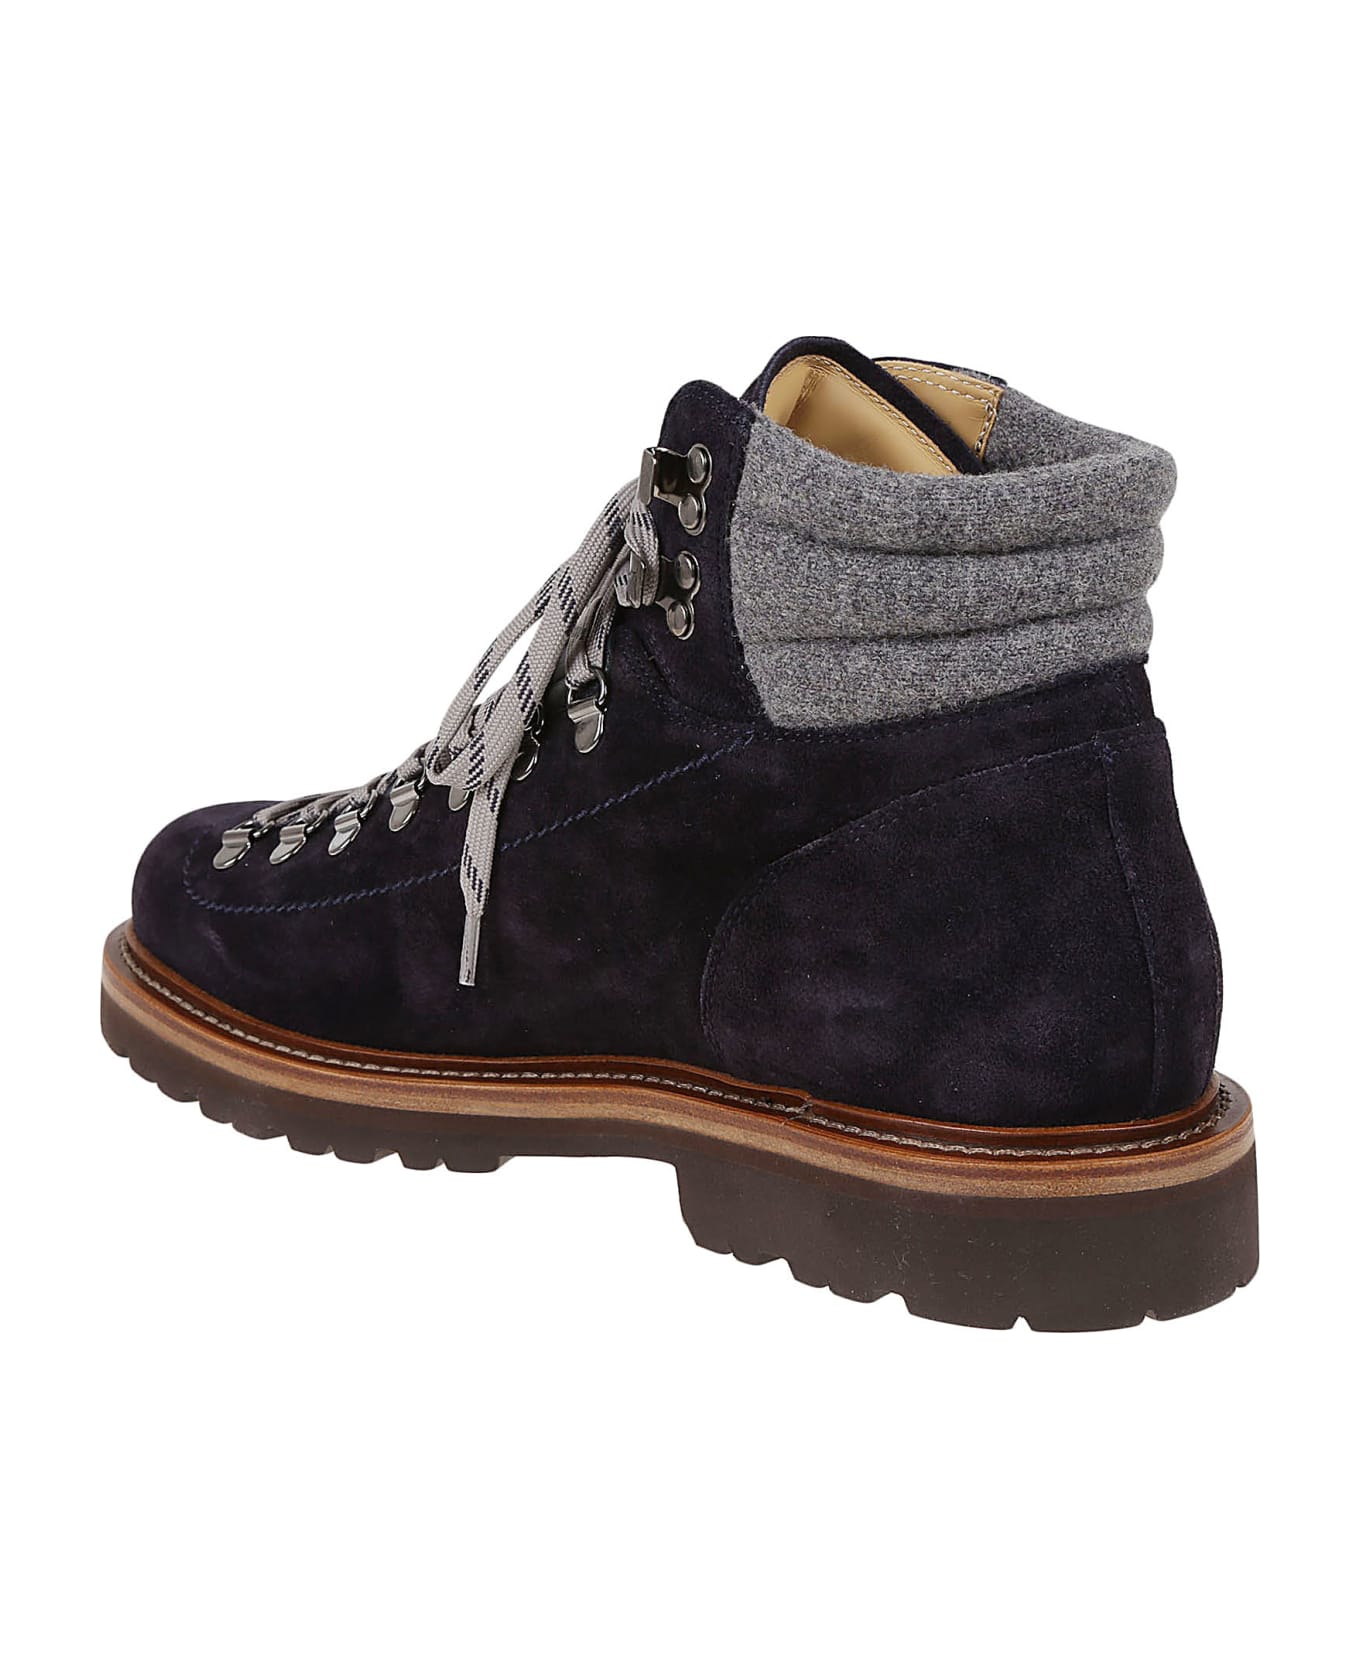 Brunello Cucinelli Boot Mountain Shoe In Soft Suede Leather And Virgin Wool Felt Inserts. Closure With Laces - Cpv46